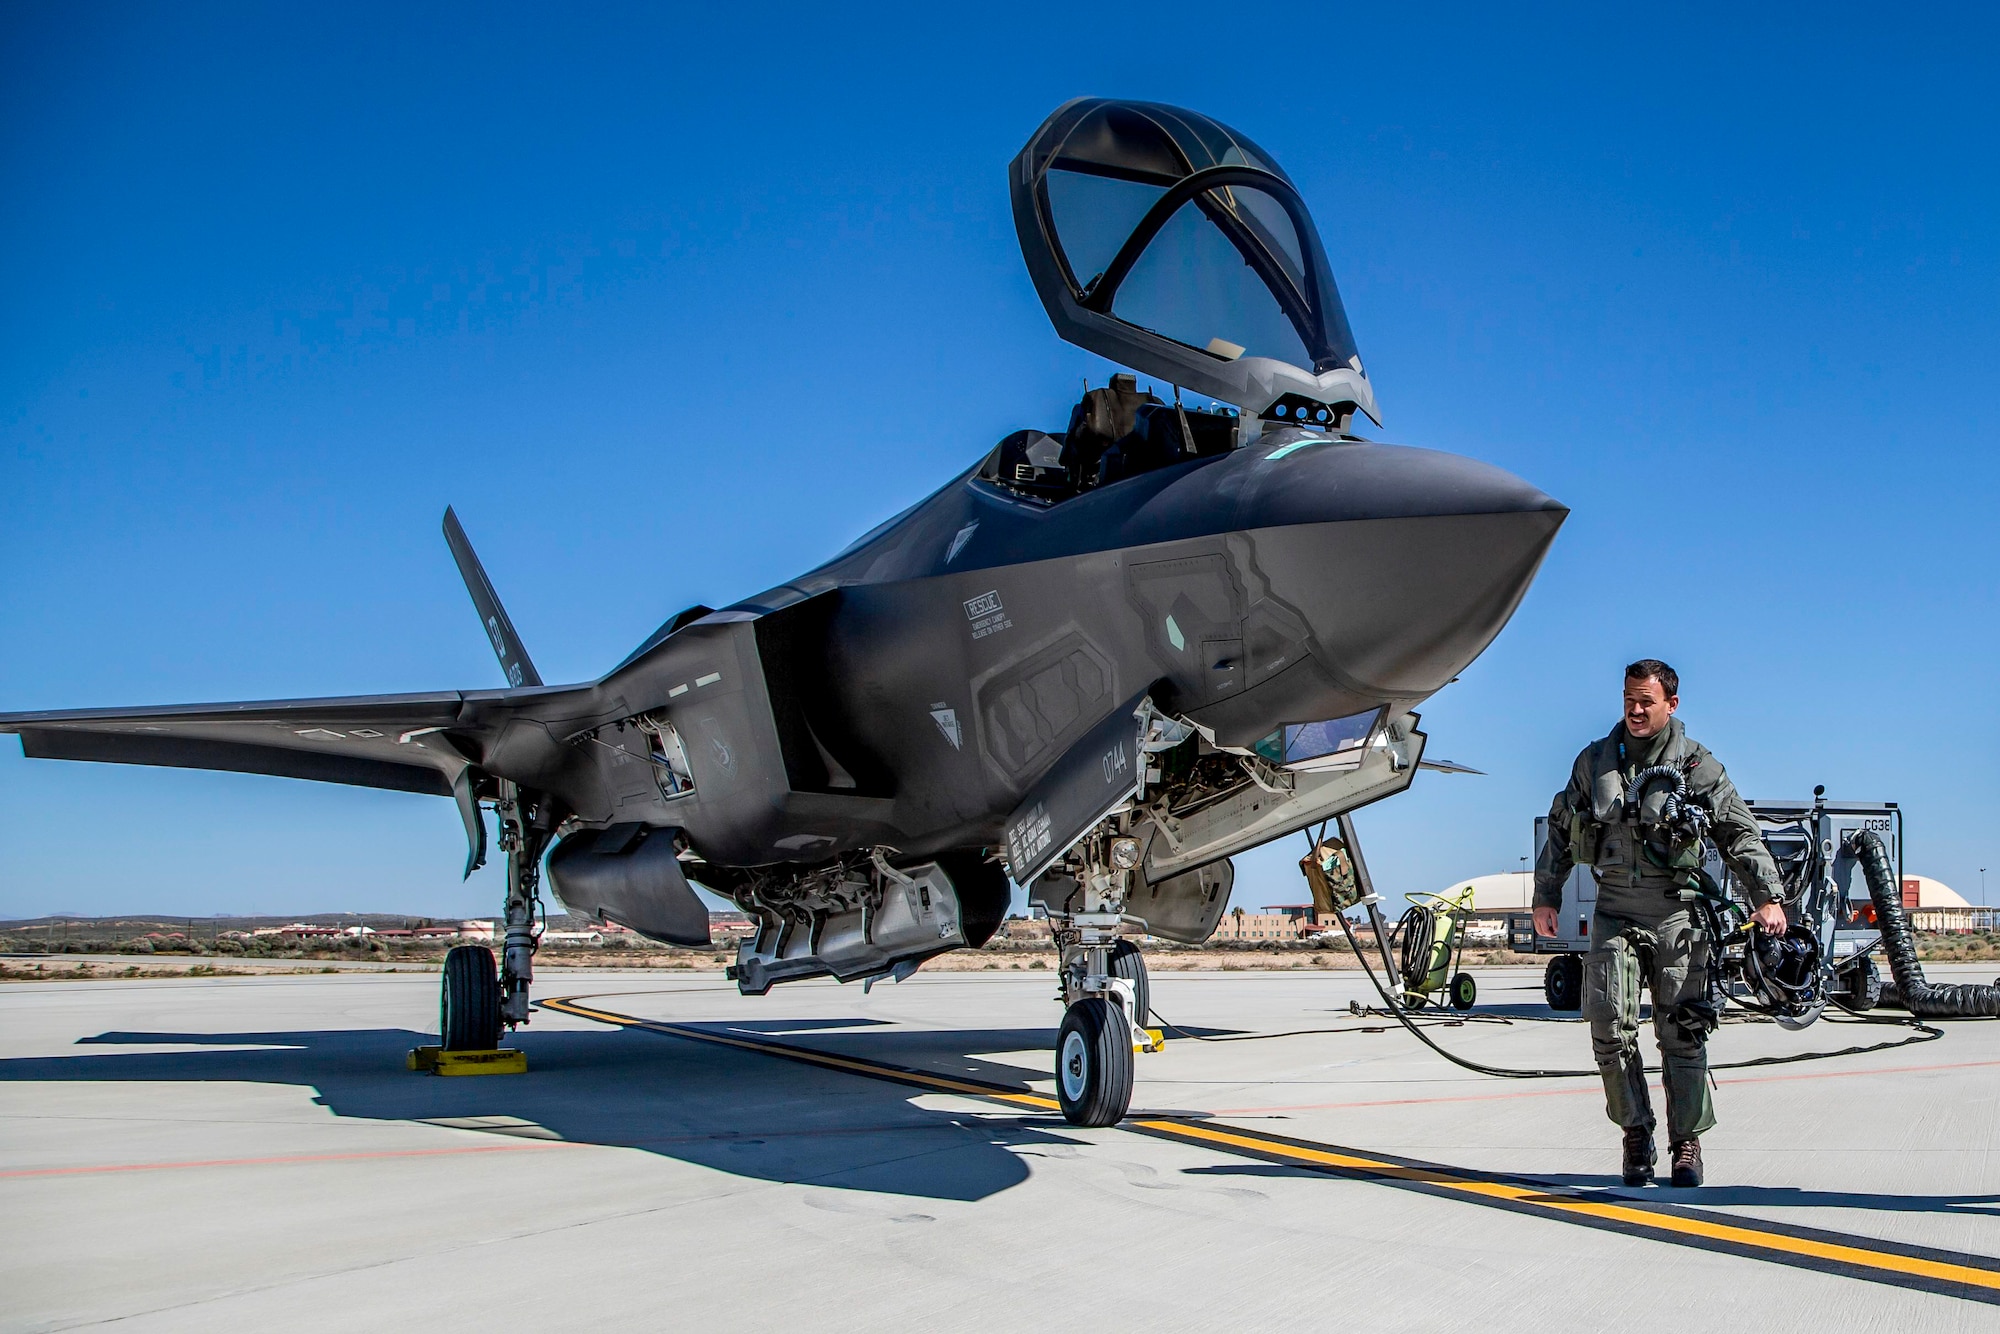 Lt. Col. Jonathan Bearce, an F-35 test pilot with the 370th Flight Test Squadron, conducts a walk-around of an F-35 Lightning II at Edwards Air Force Base, Califonia, April 2, 2020. (Photo courtesy of Darin Russell, Lockheed Martin)